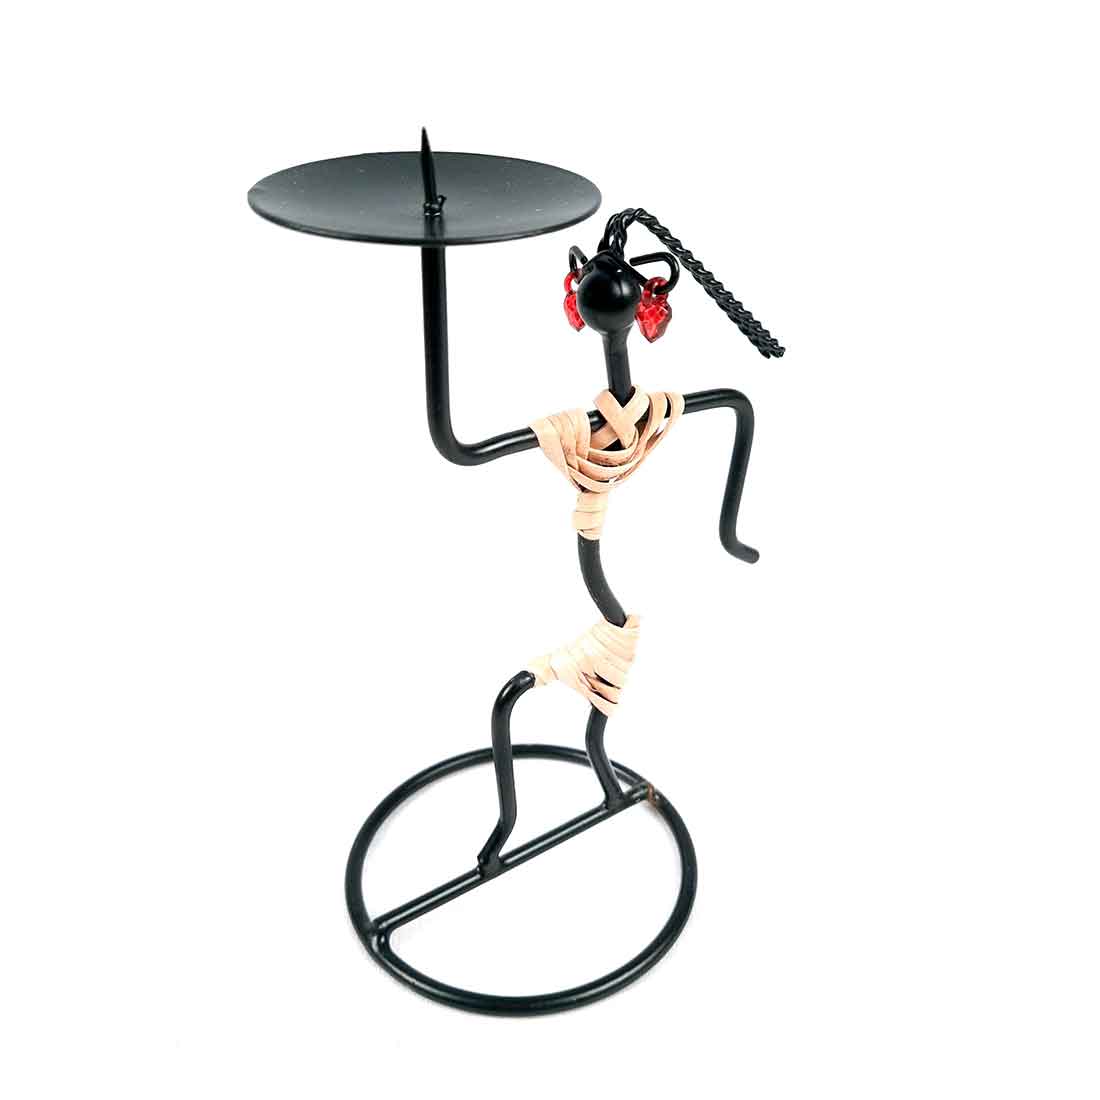 Candle Holder Stand | TeaLight Holder With One Slots Cum Showpiece  | Tea Light Candle Stands - Dancing Lady Design - For Home, Table, Living Room, Dining room, Bedroom Decor | For Diwali Decoration & Gifts - 5 Inch